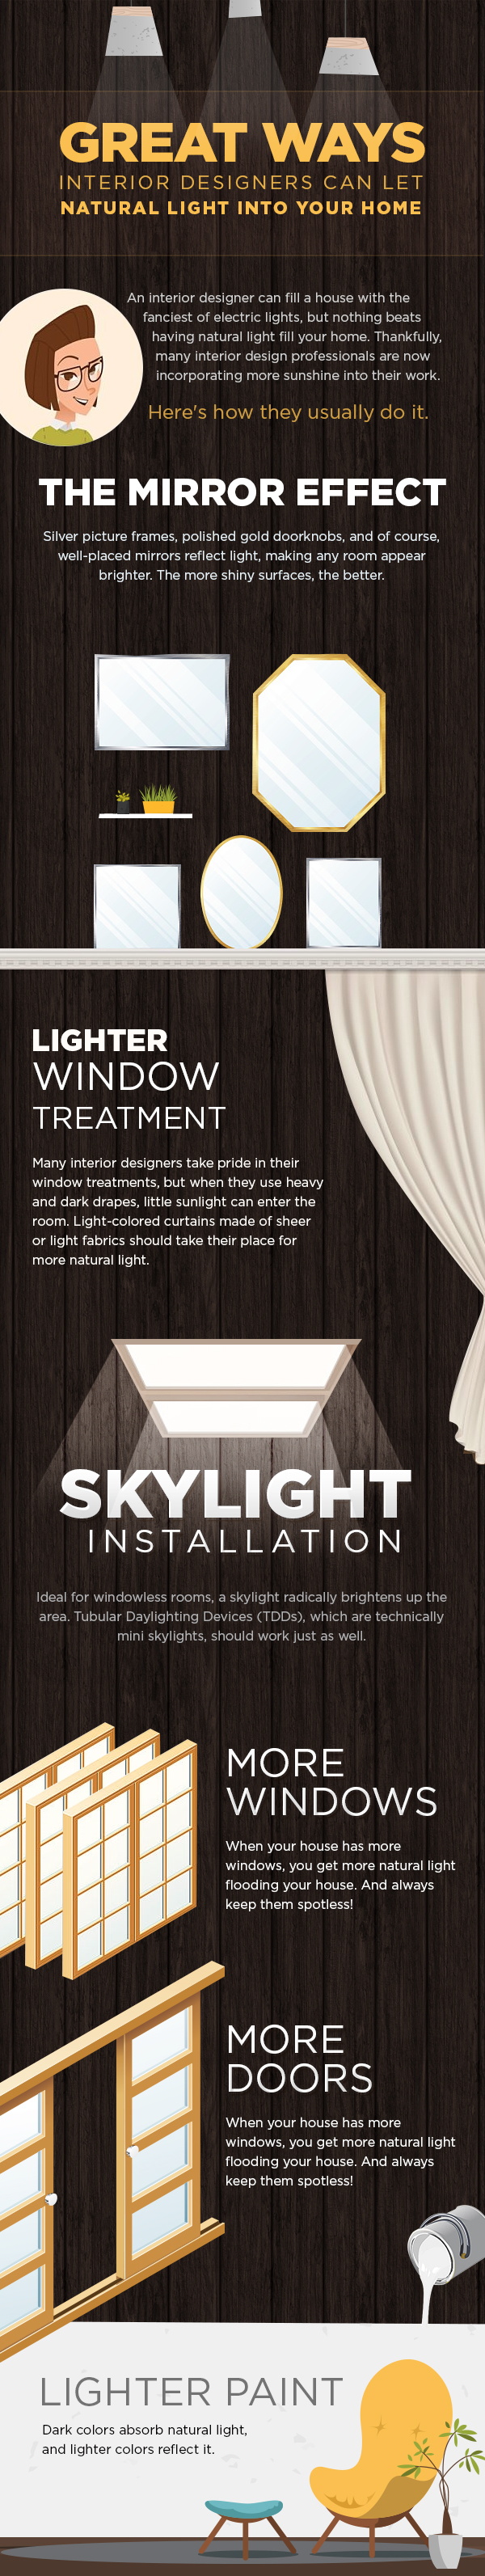 Great Ways Interior Designers Can Let Natural Light Into Your Home (Infographic)